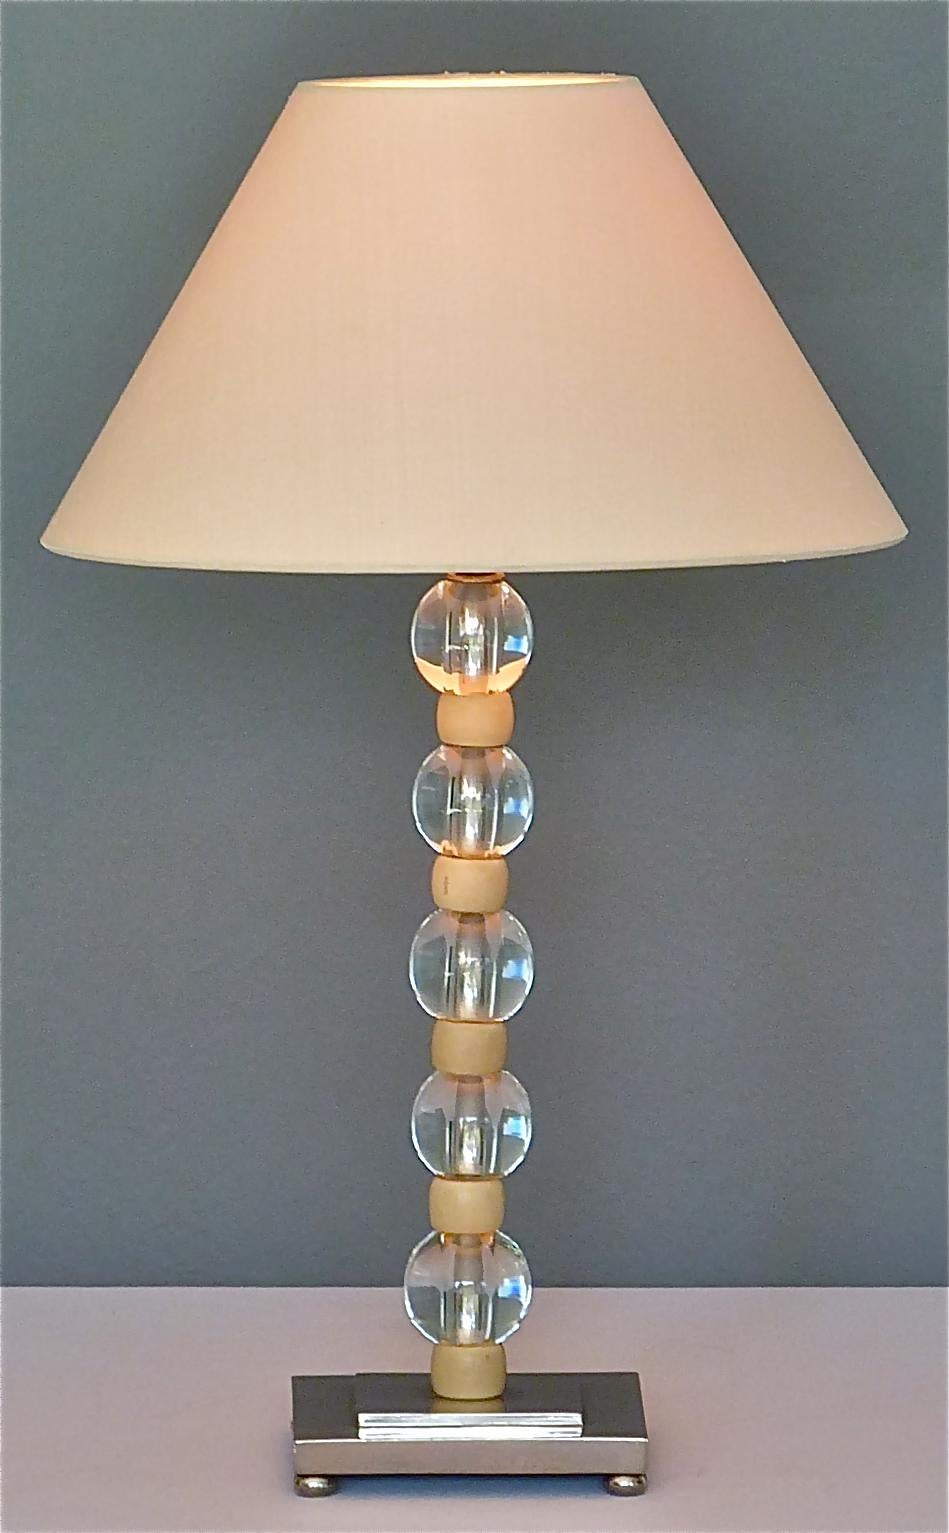 French Art Deco Adnet Baccarat Style Table Lamp Chrome Glass Ivory Color 1930s For Sale 12